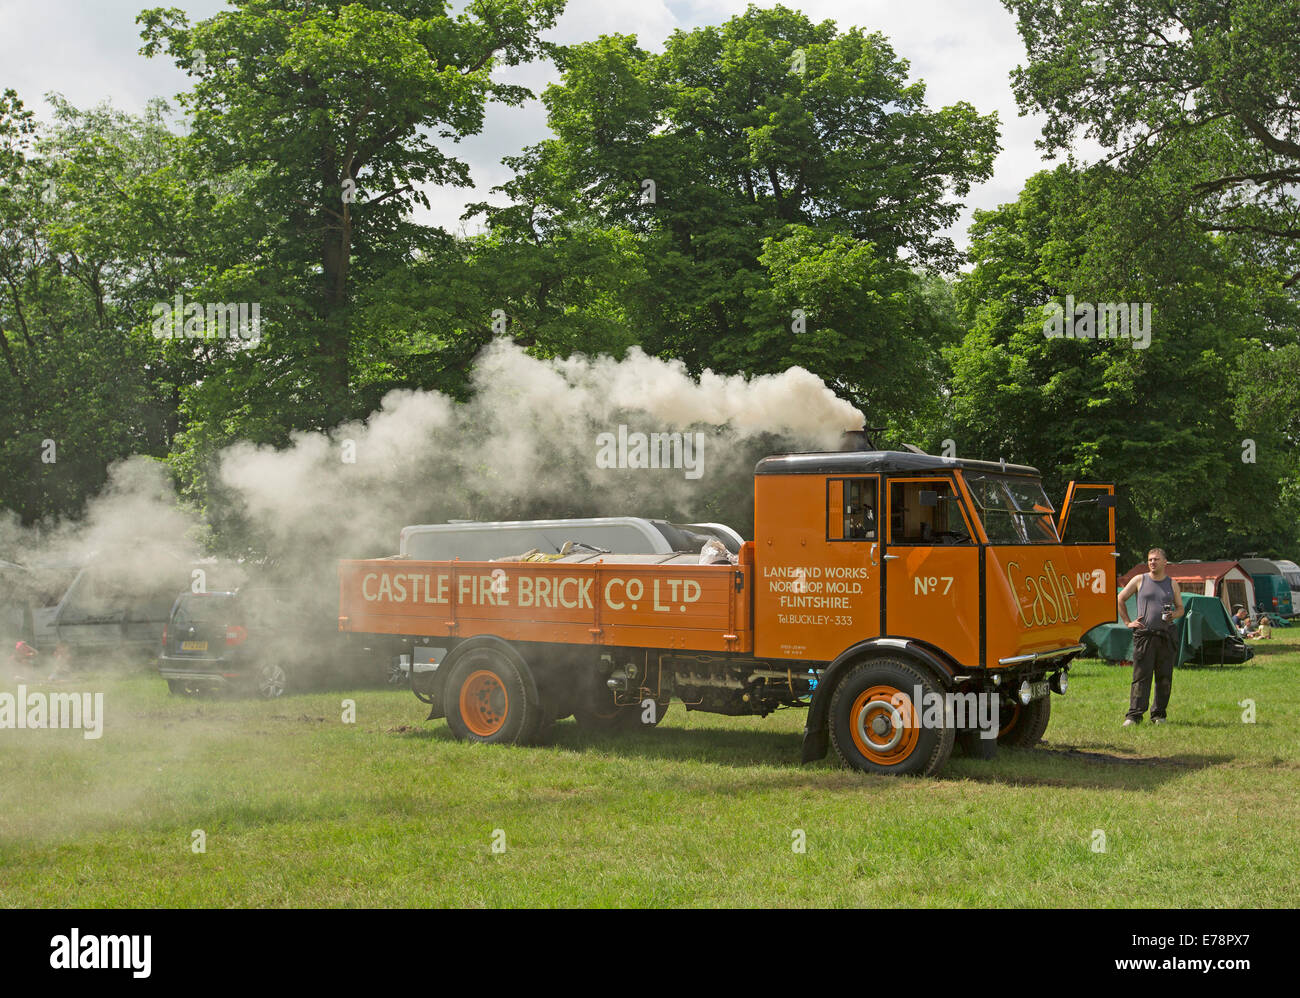 Immaculately restored steam lorry with bright orange paintwork puffing out smoke and on display at English country fair Stock Photo